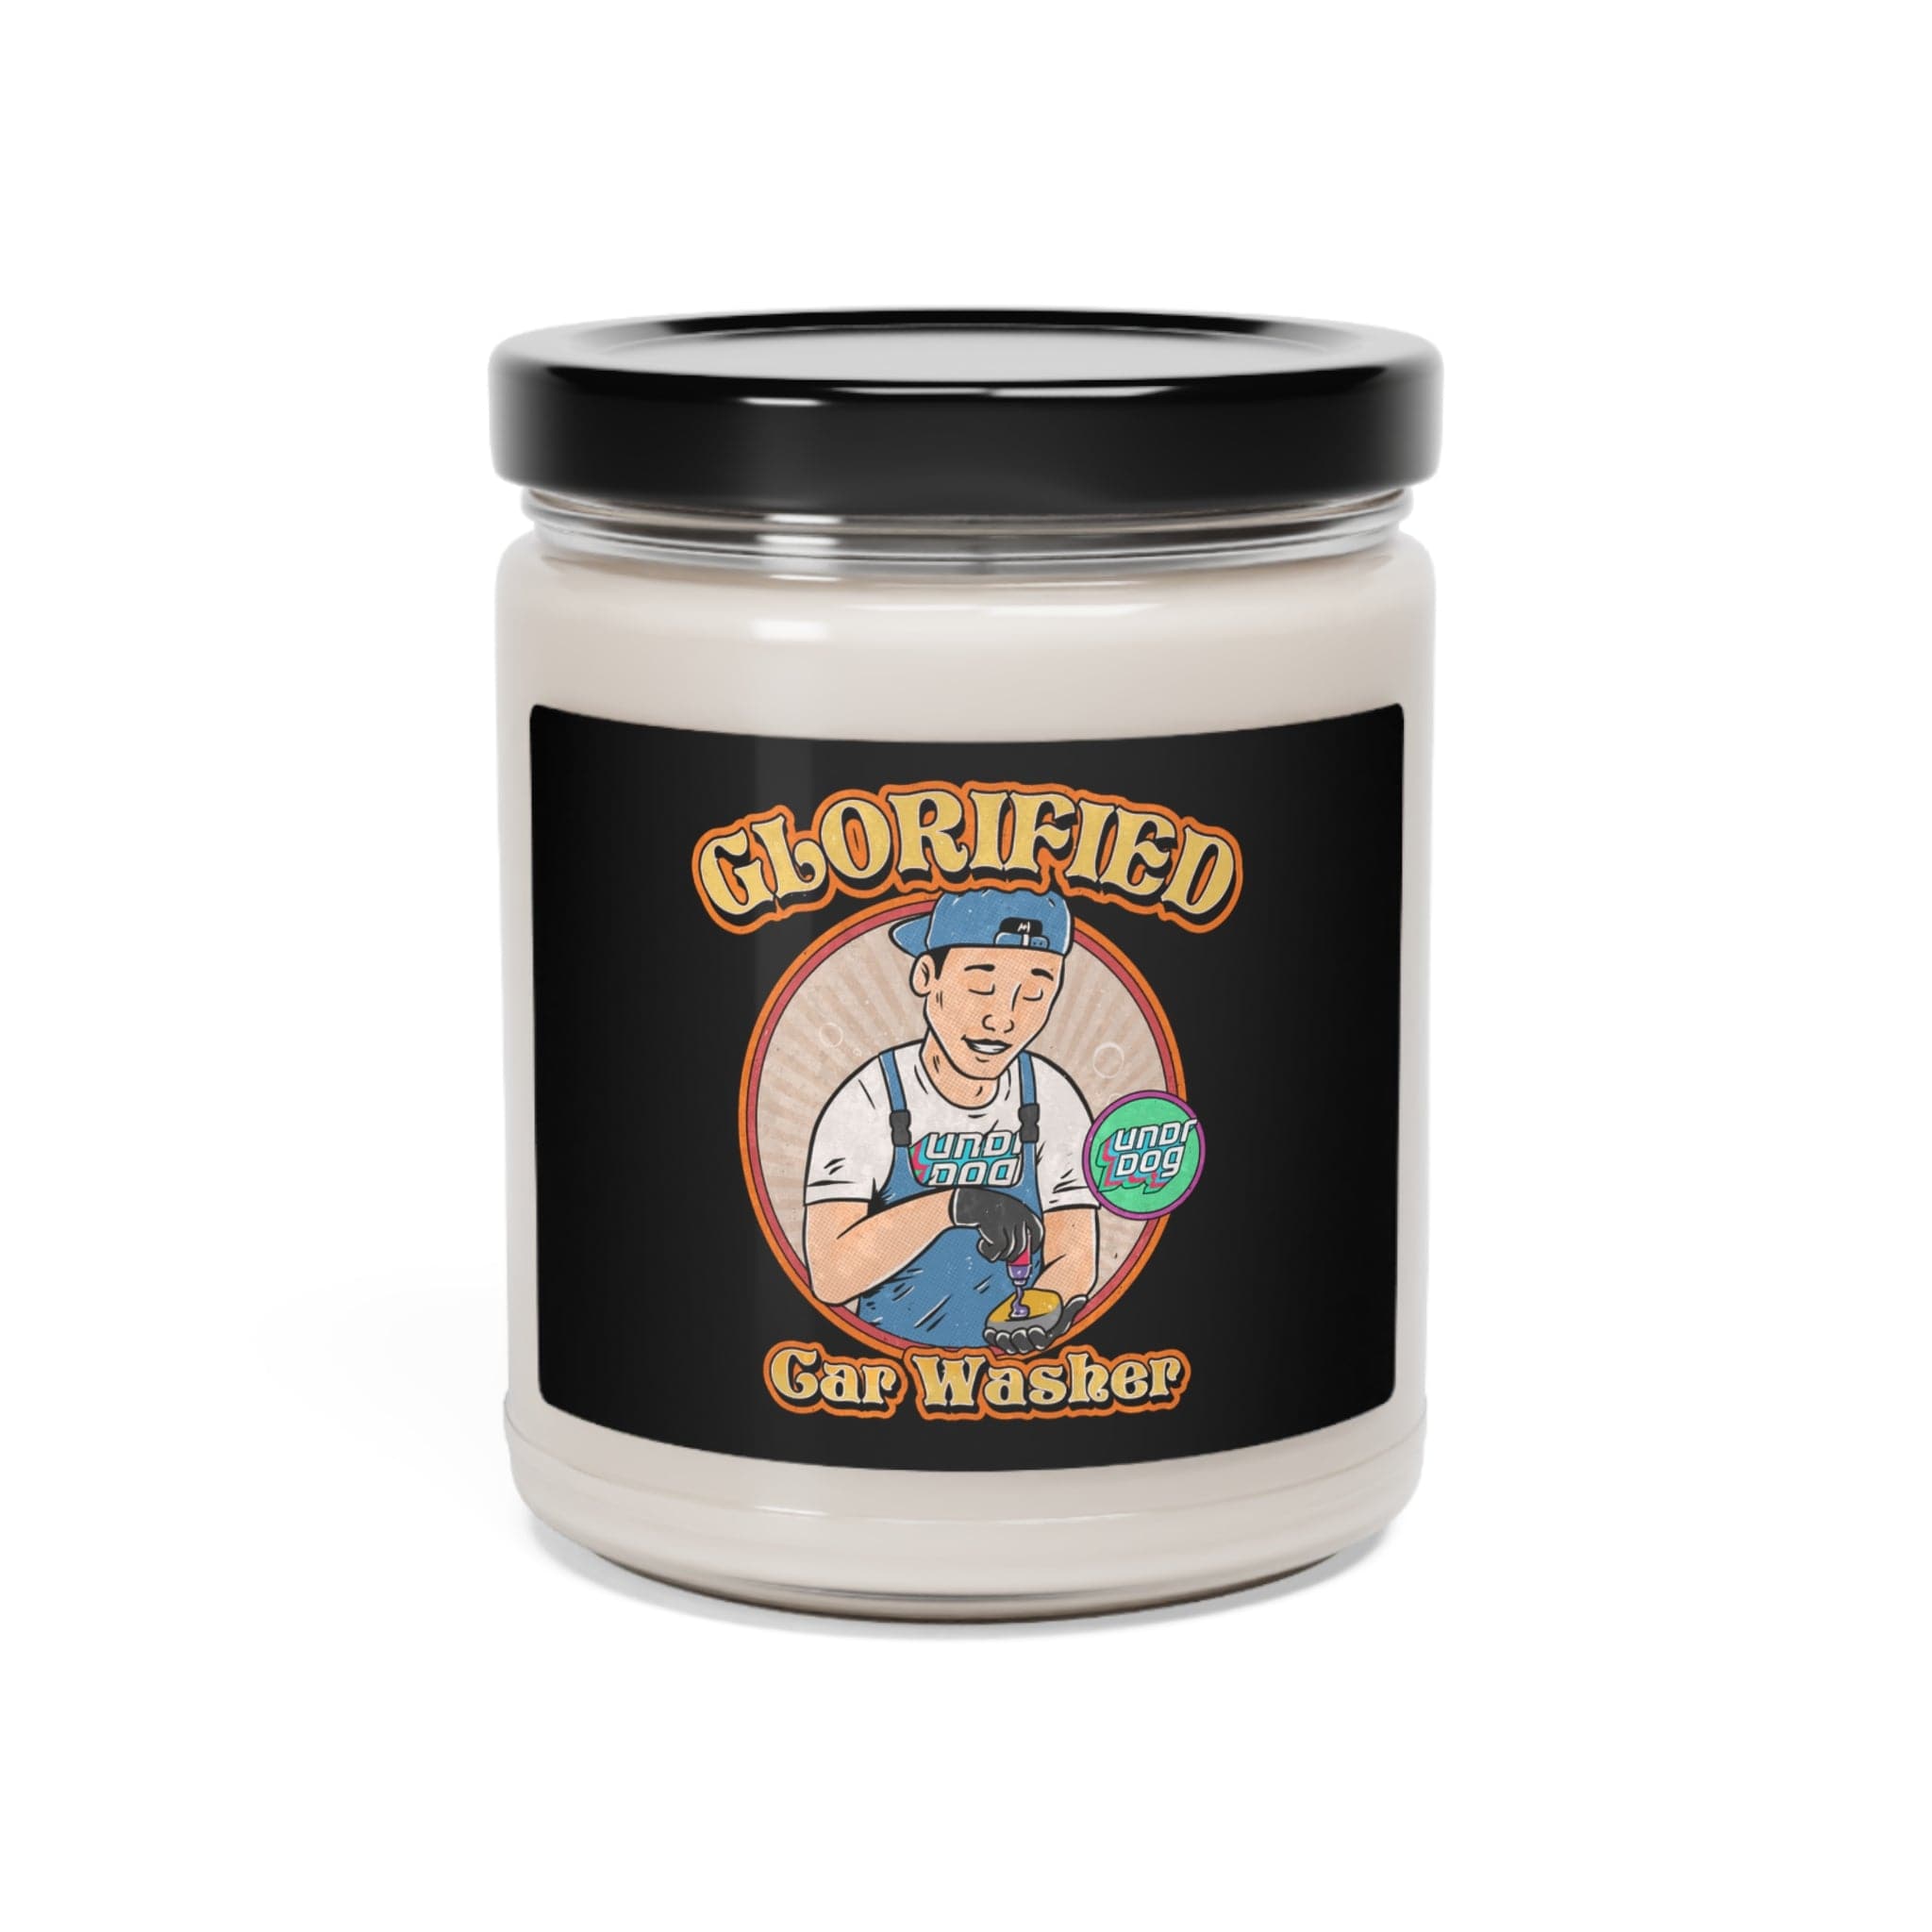 7385277286135115204_2048.jpg - Glorified Car Washer Scented Candle, 9oz - Undrdog Surface Products